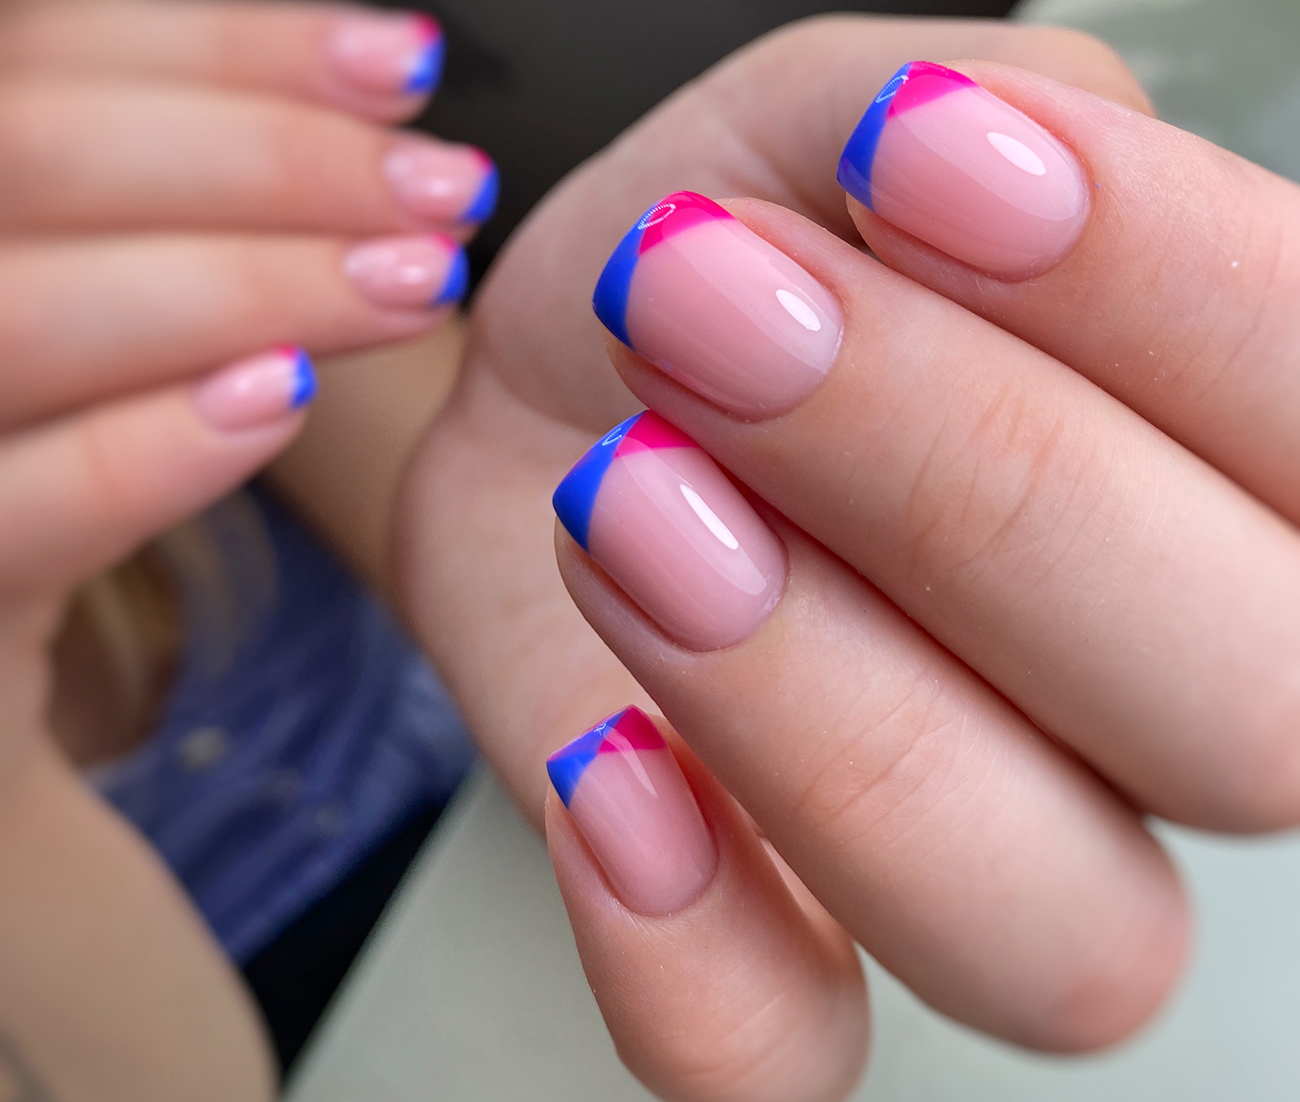 Soft square nails grow beautifully, but such nails are easier to break than round and oval ones